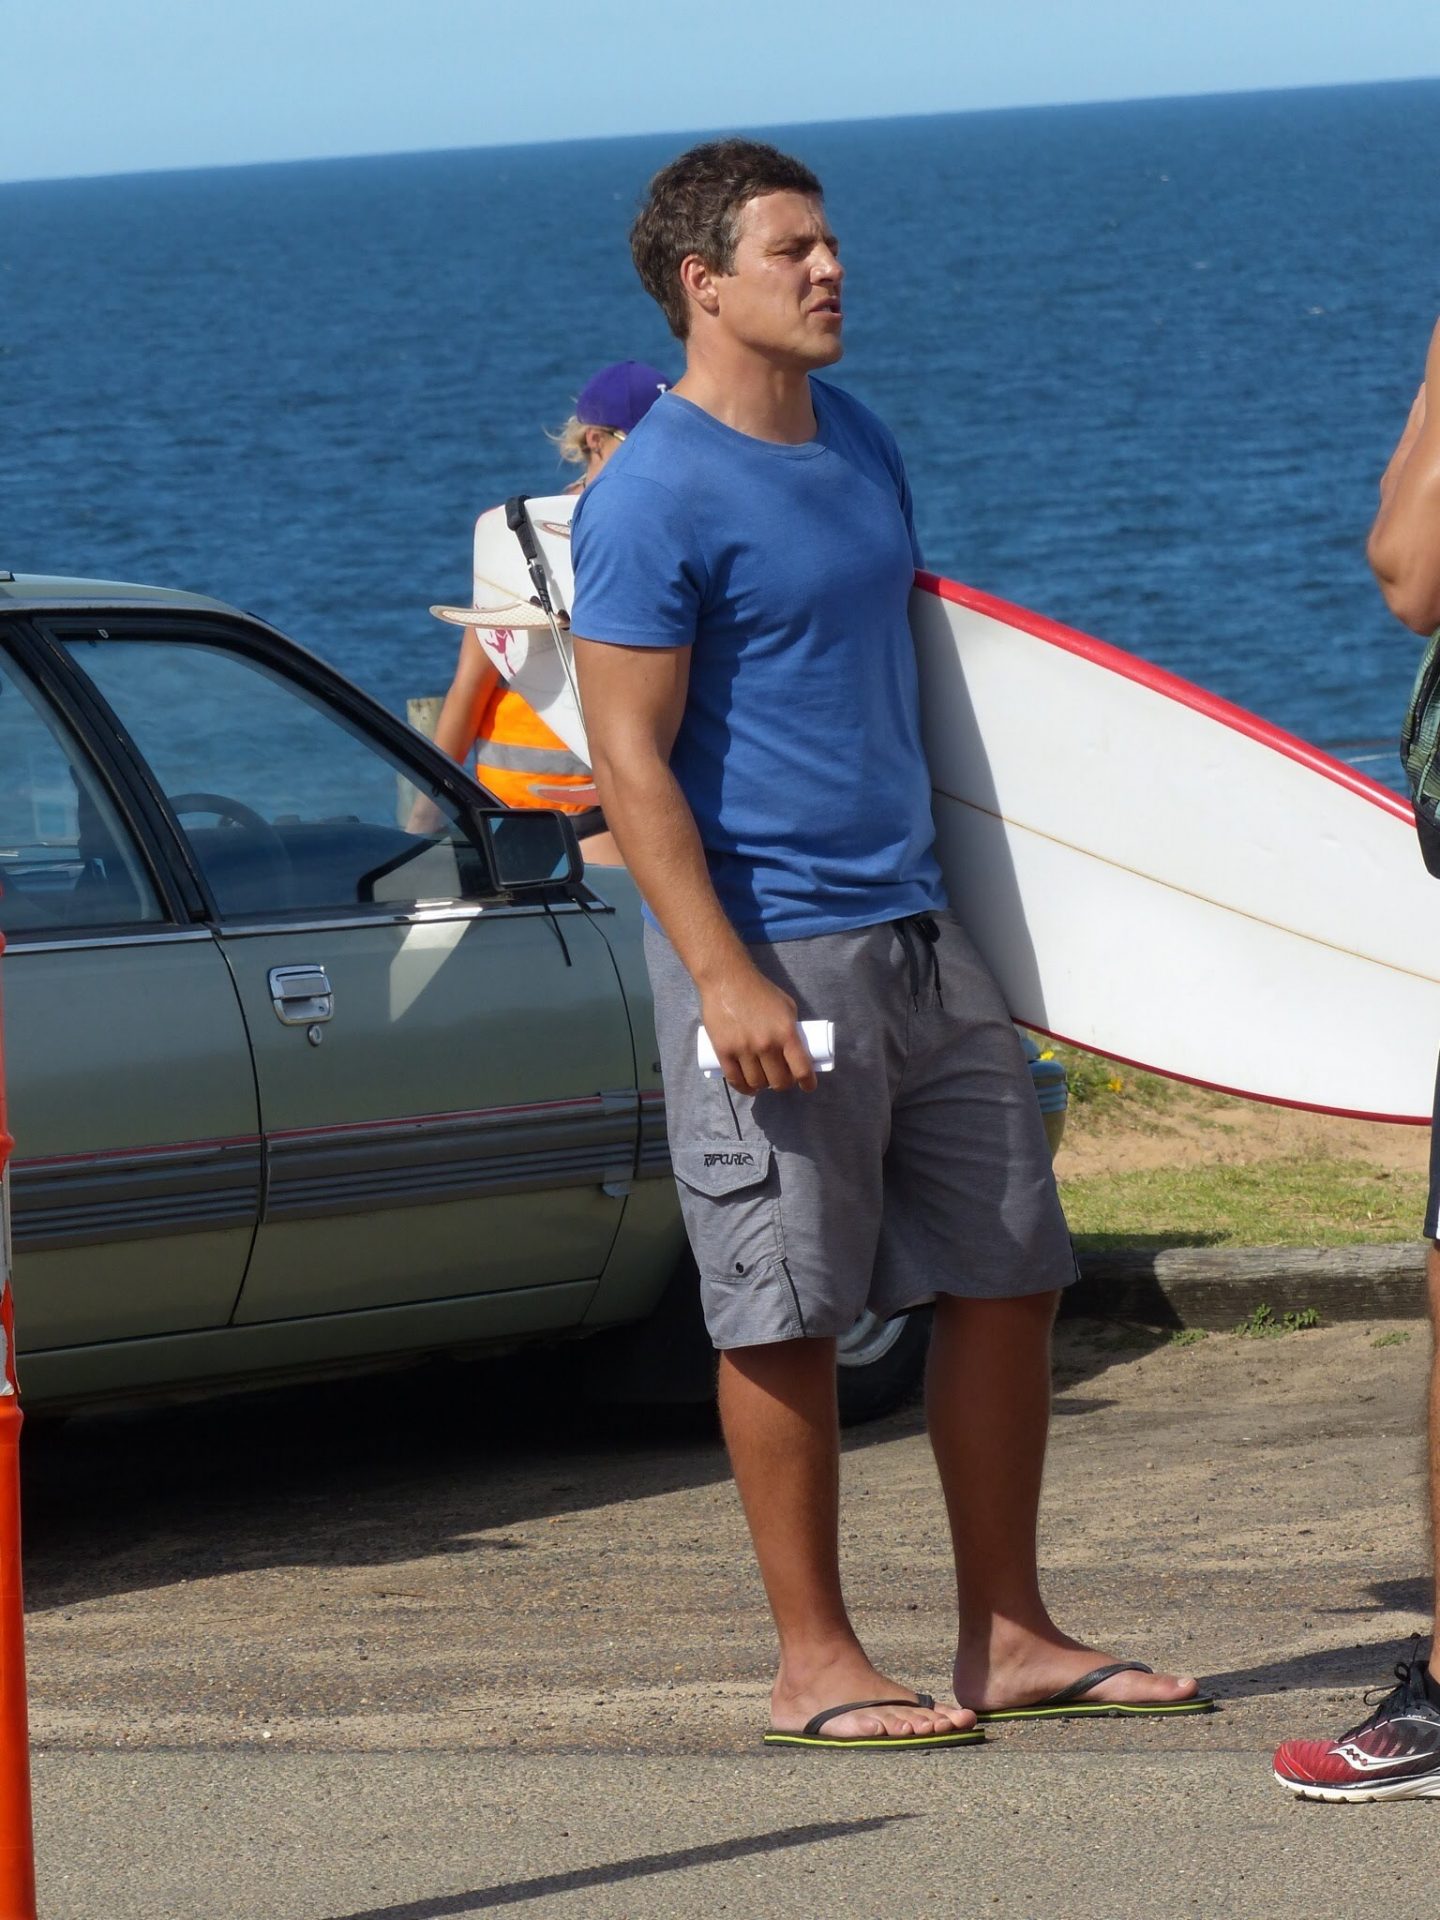 Brax from Home and Away